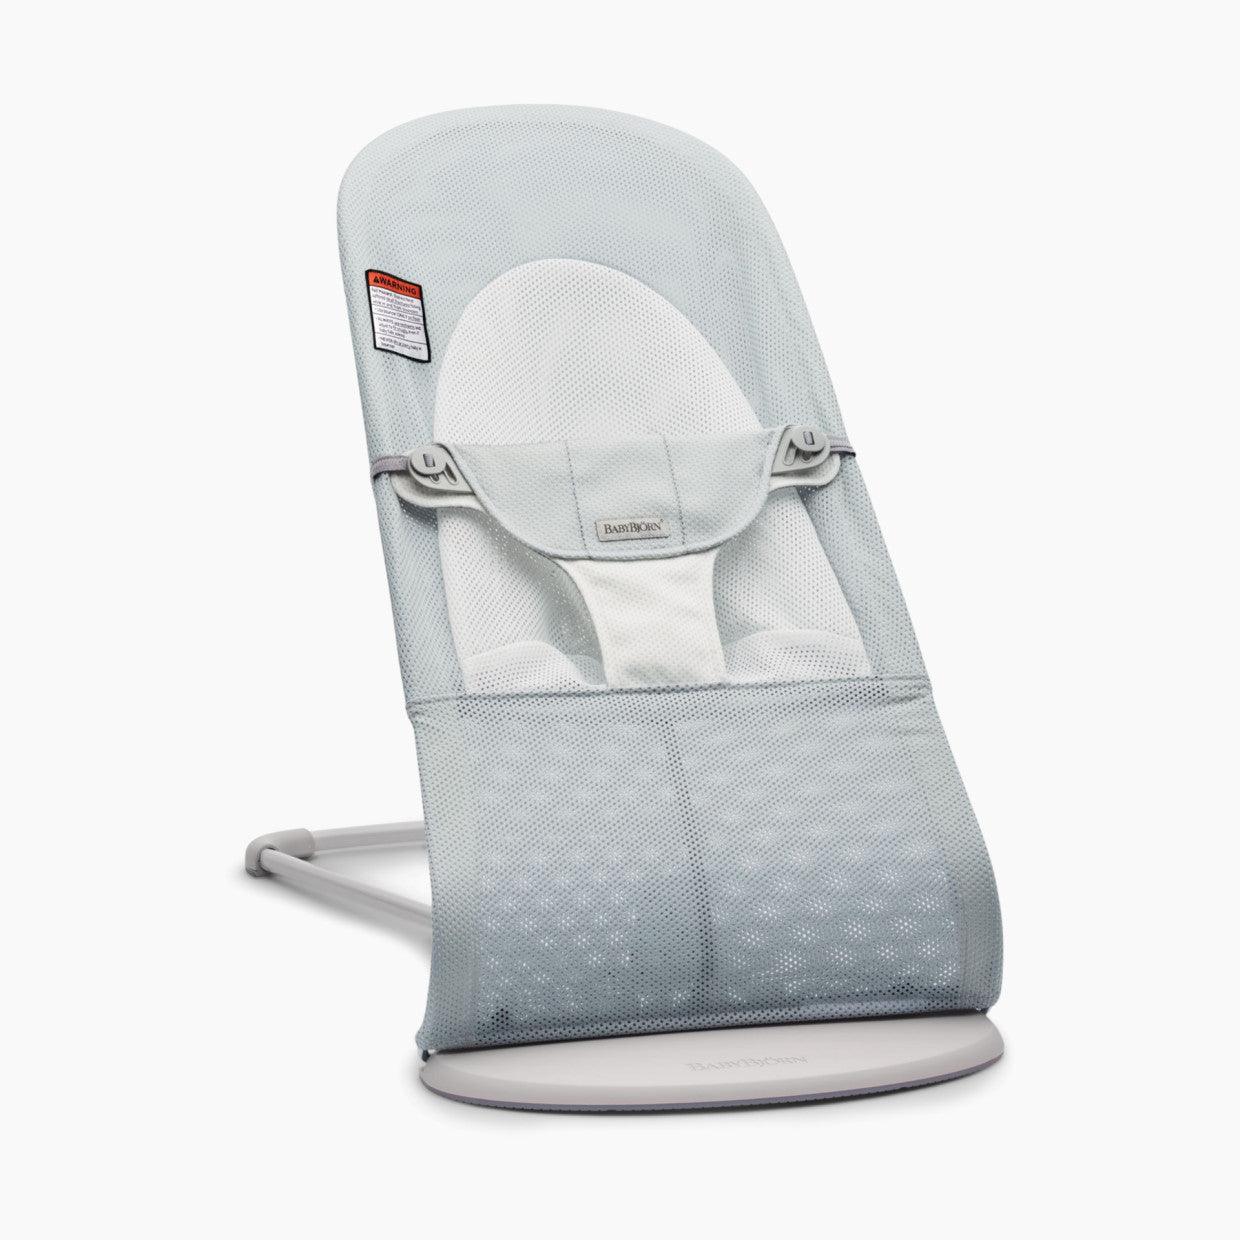 Baby Bjorn Bouncer Bliss Mesh - Silver/White - Traveling Tikes 